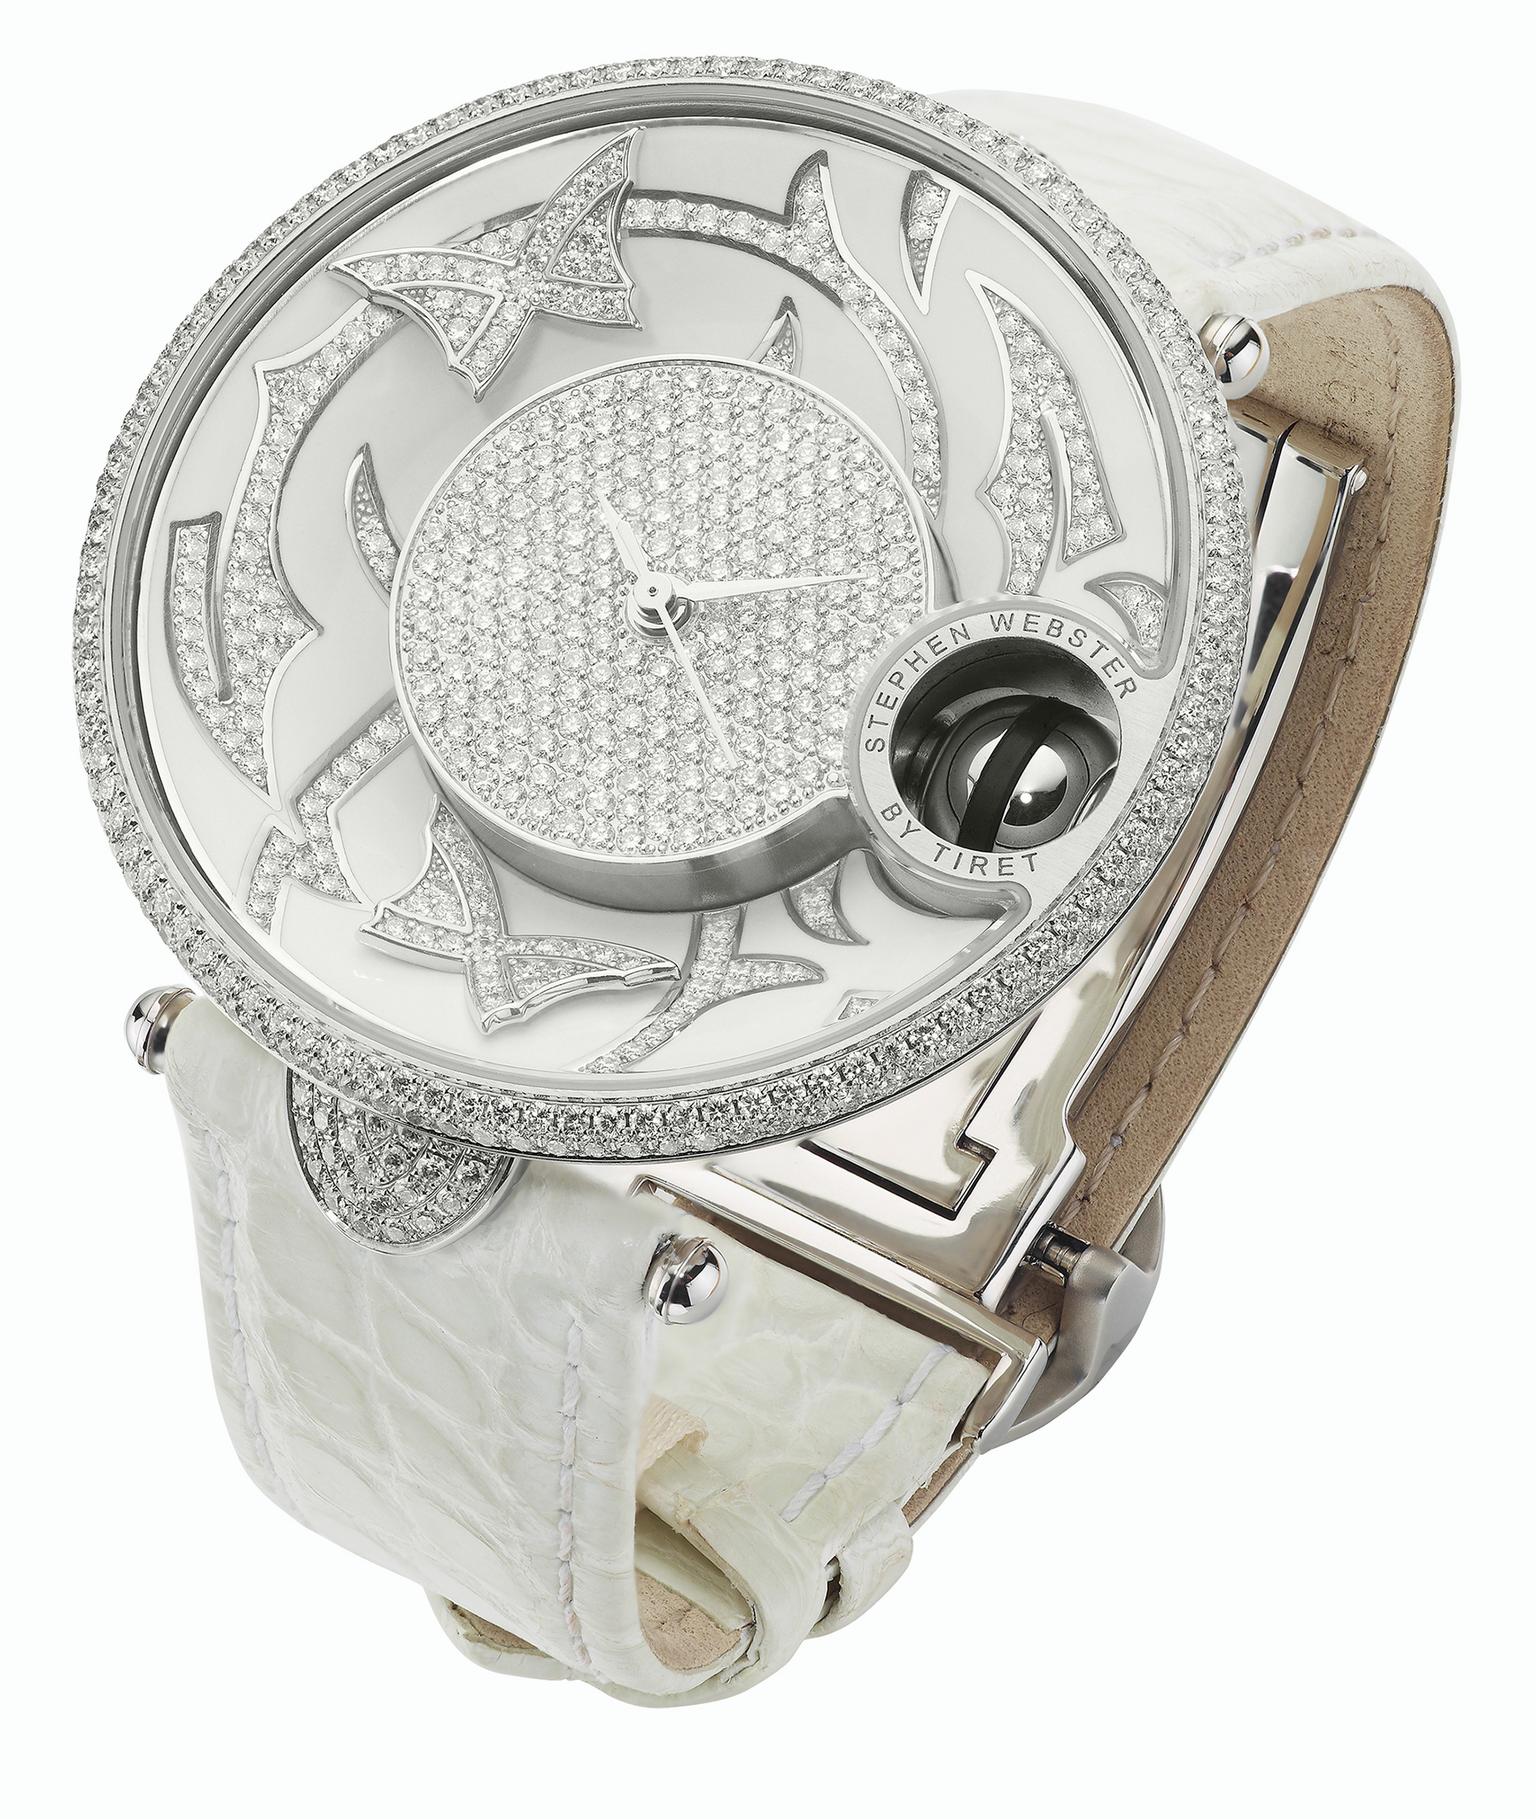 Stephen Webster Fly by Night with Tiret watch with white diamonds_20140110_Zoom